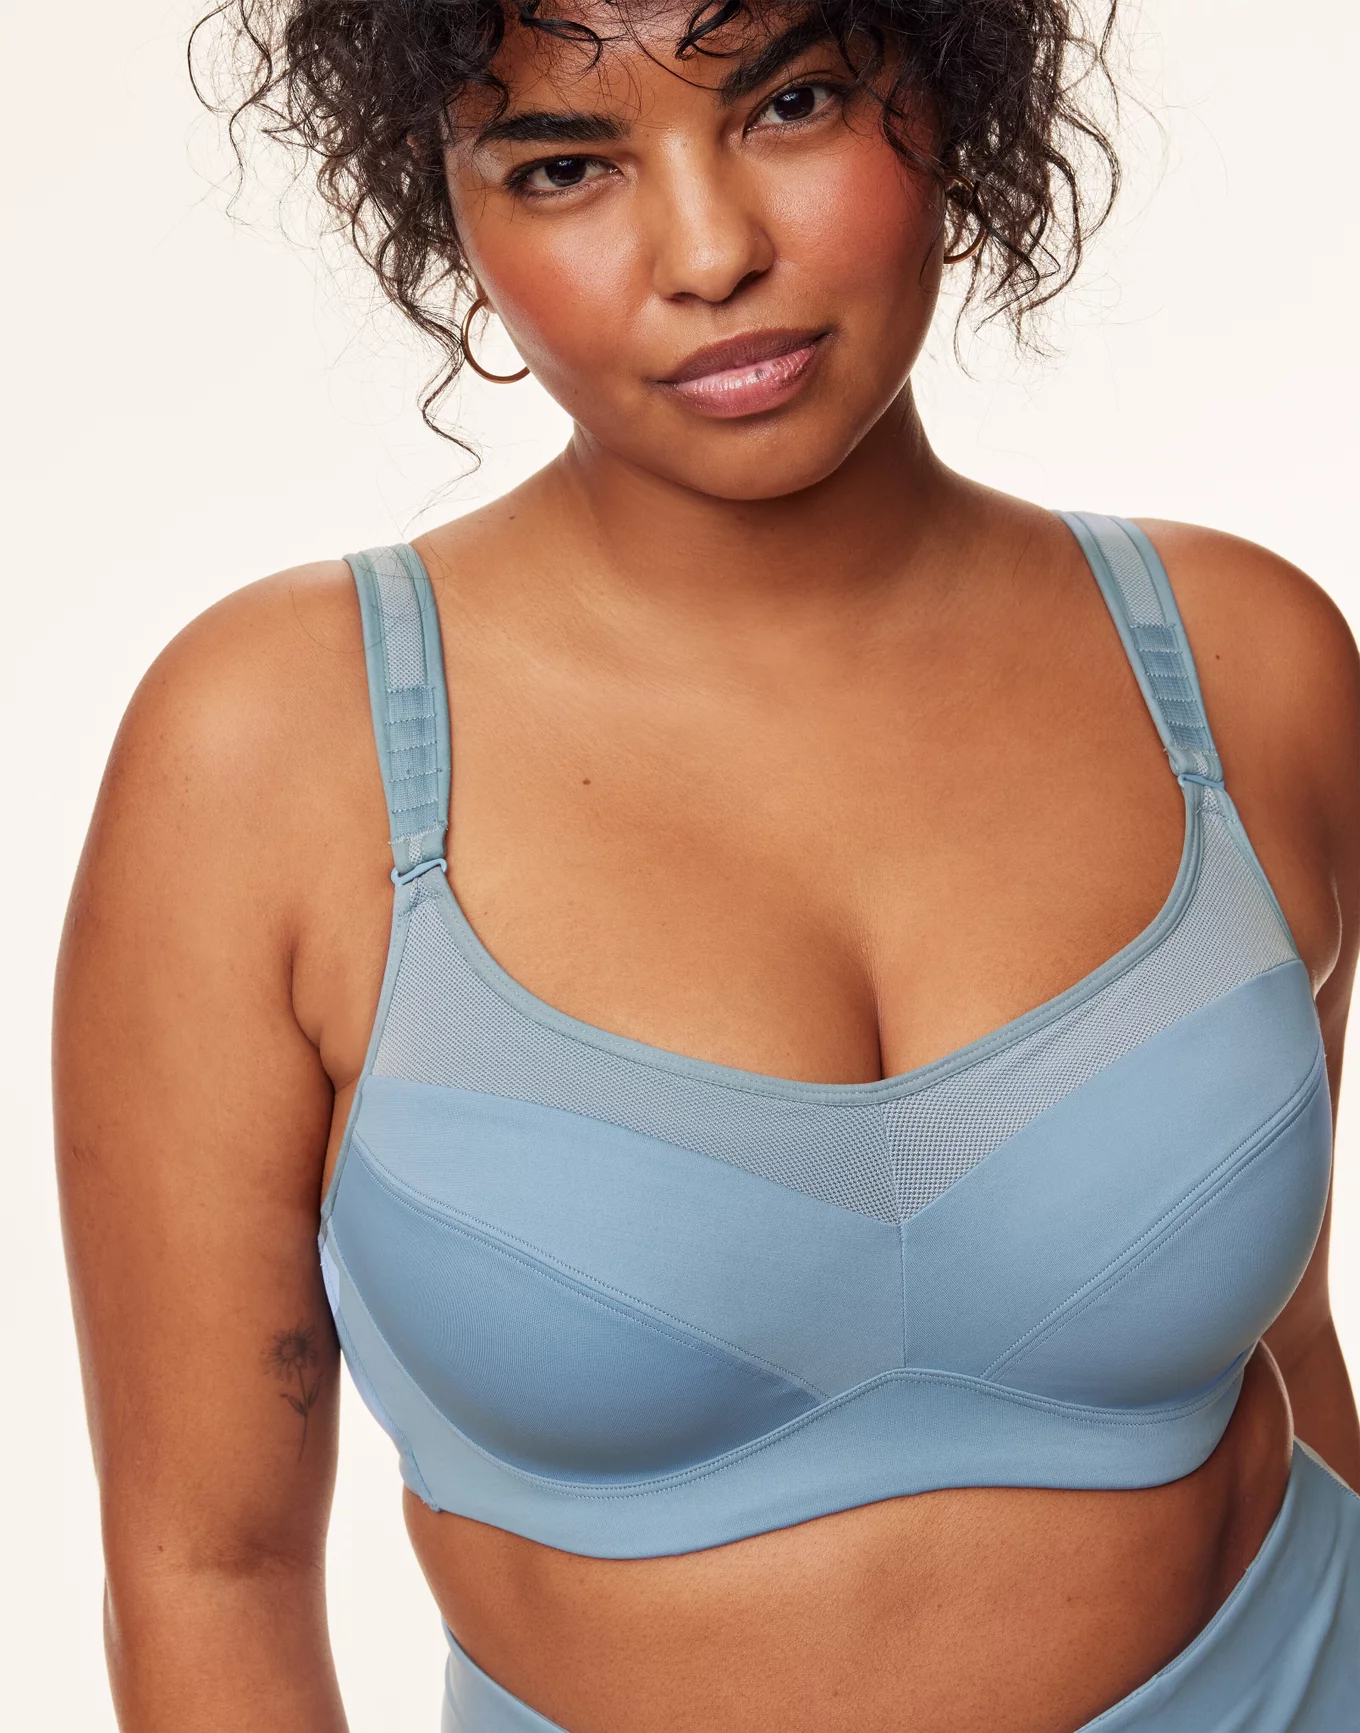 Bralette with Sweater White Bandeau Bra Yoga Bras for Large Bust White  Halter Sports Bra Plus Size Racerback Bra DDD Size Bra Plus Size Bras Best  Uplifting Bra Tube Top with Bralette